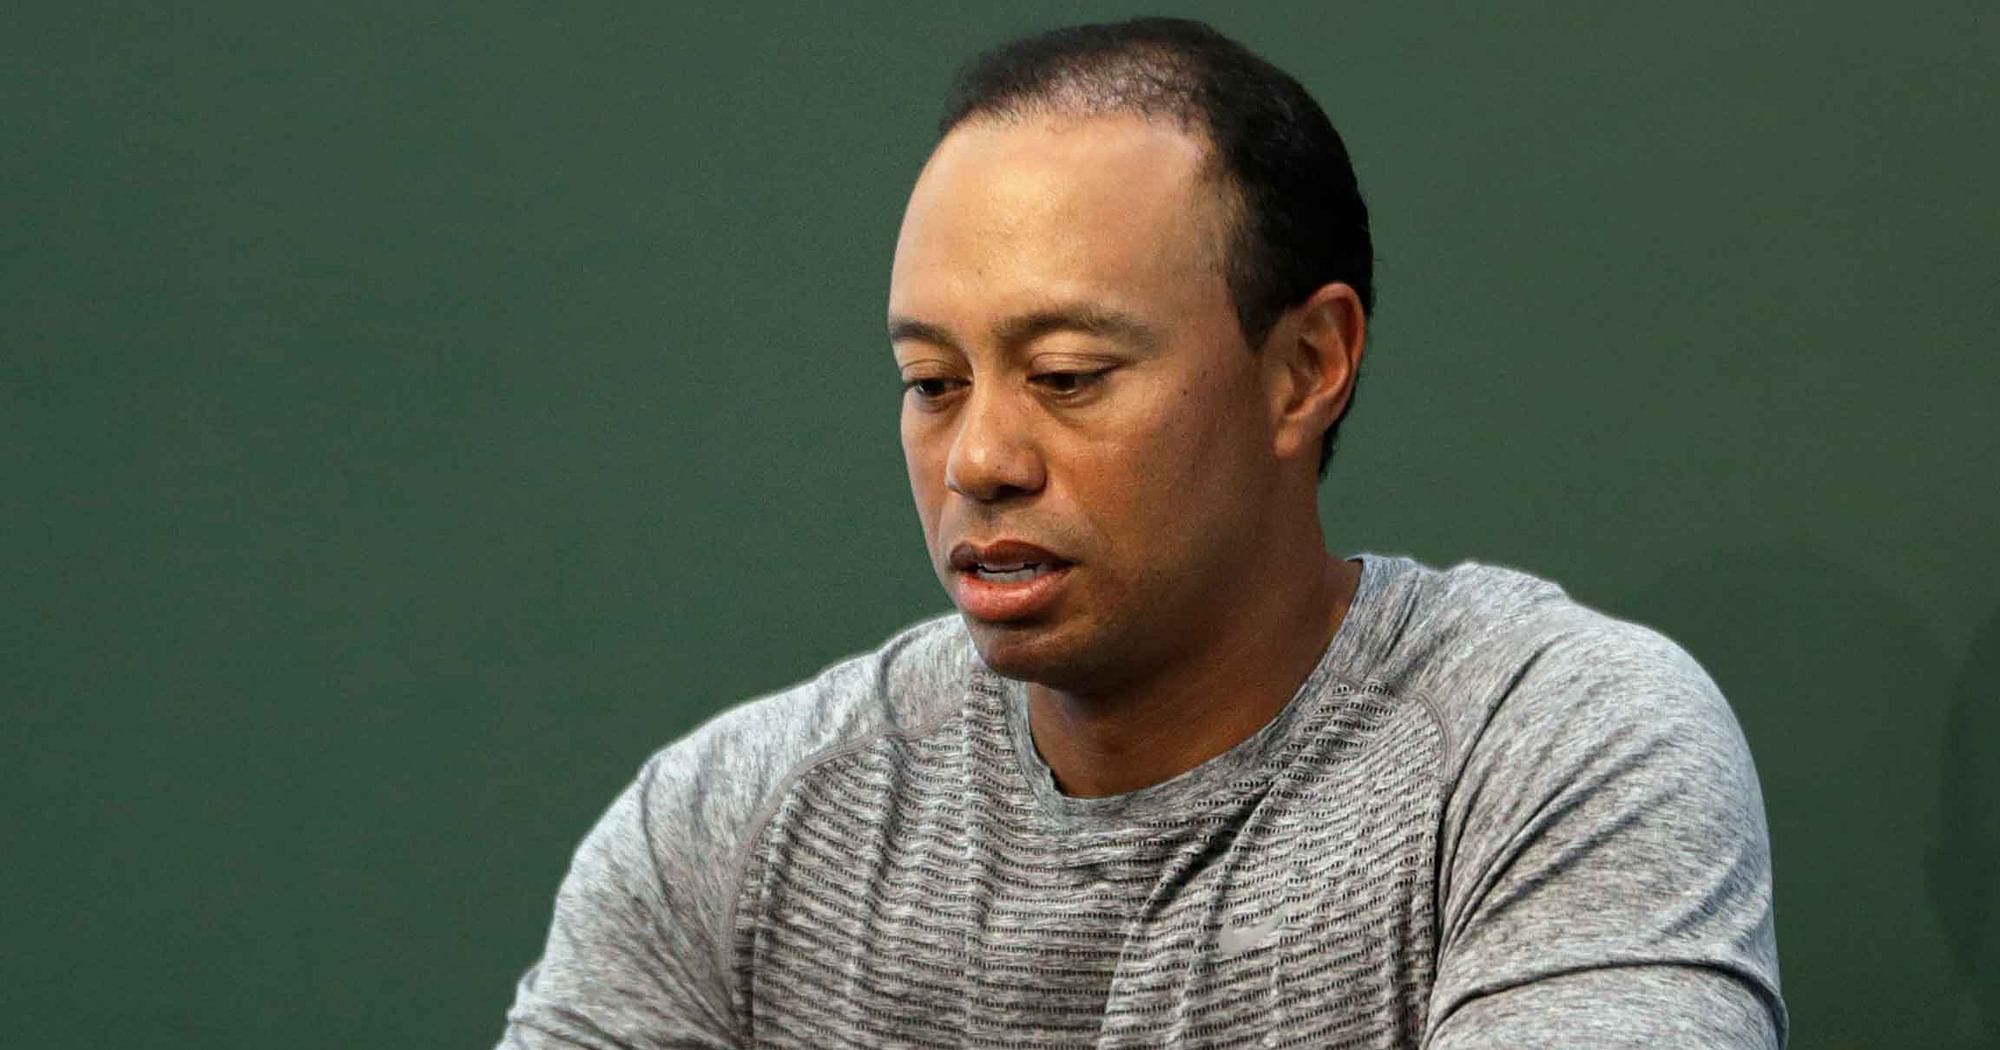 Tiger Woods Apologises For Dui Arrest Blames “mix Of Medication”